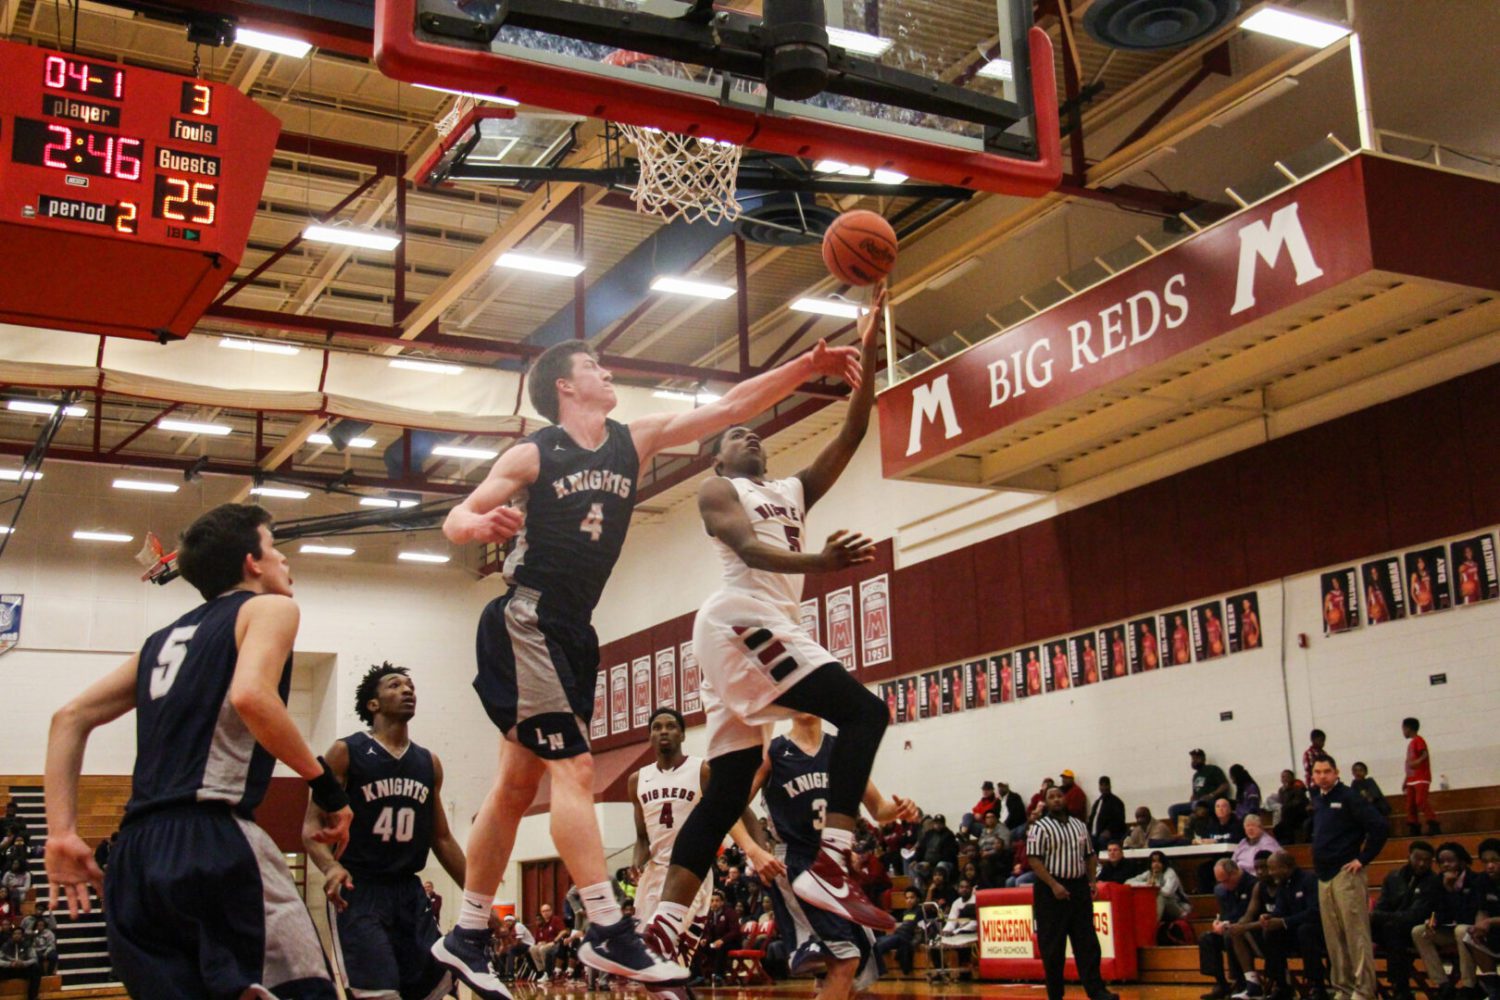 Big Red seniors shine in last home game, a 68-59 victory over Kalamazoo Loy Norrix